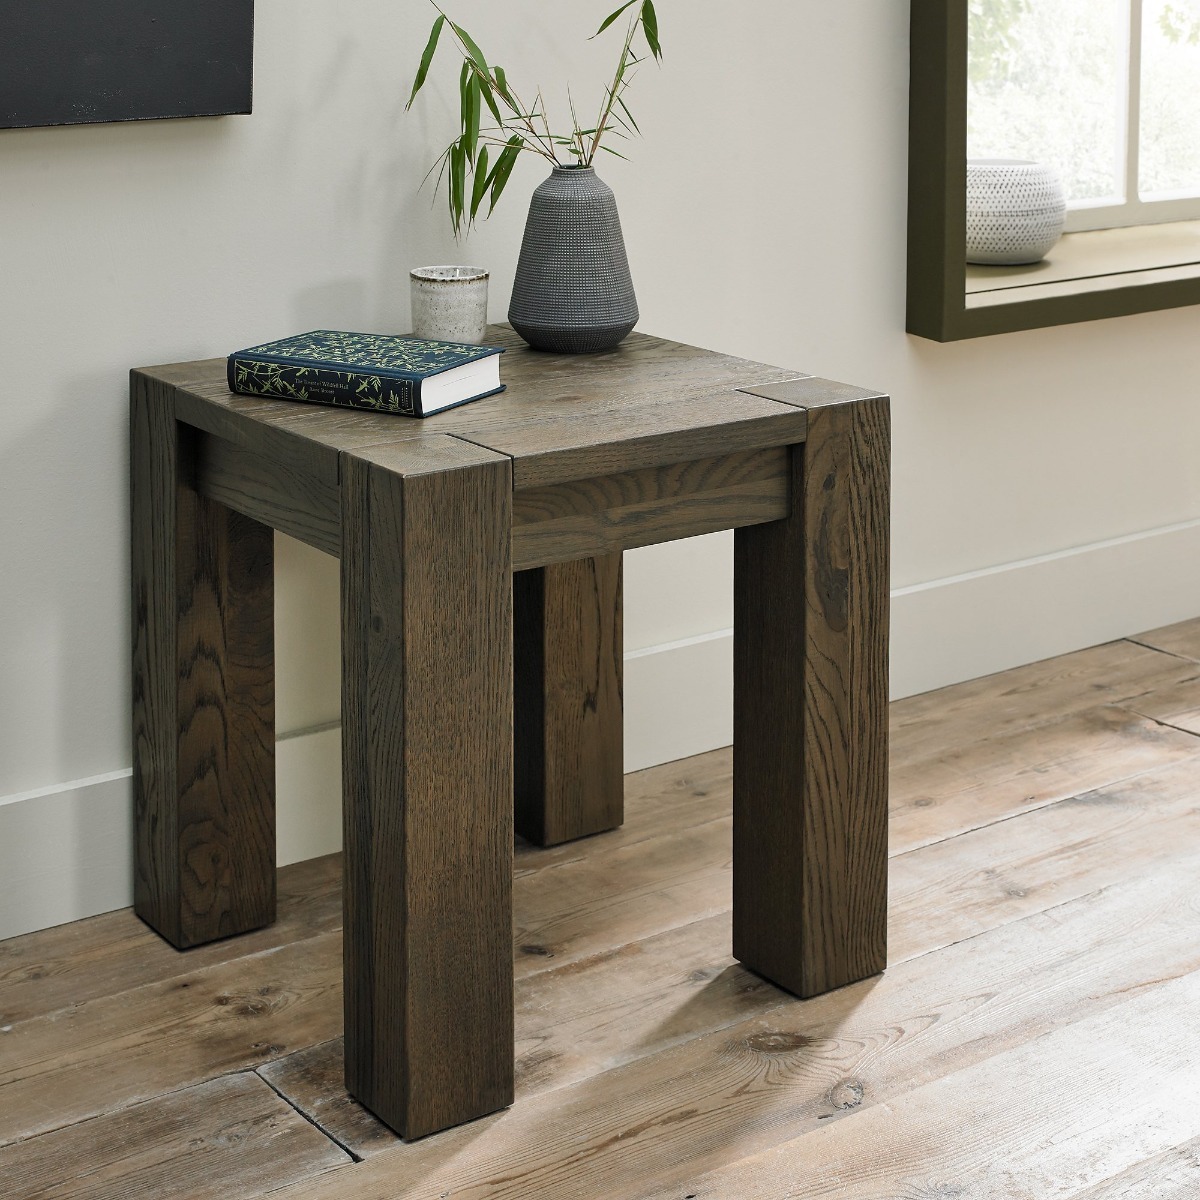 Logan Fumed Oak Lamp Table by Bentley Designs | Style Our Home